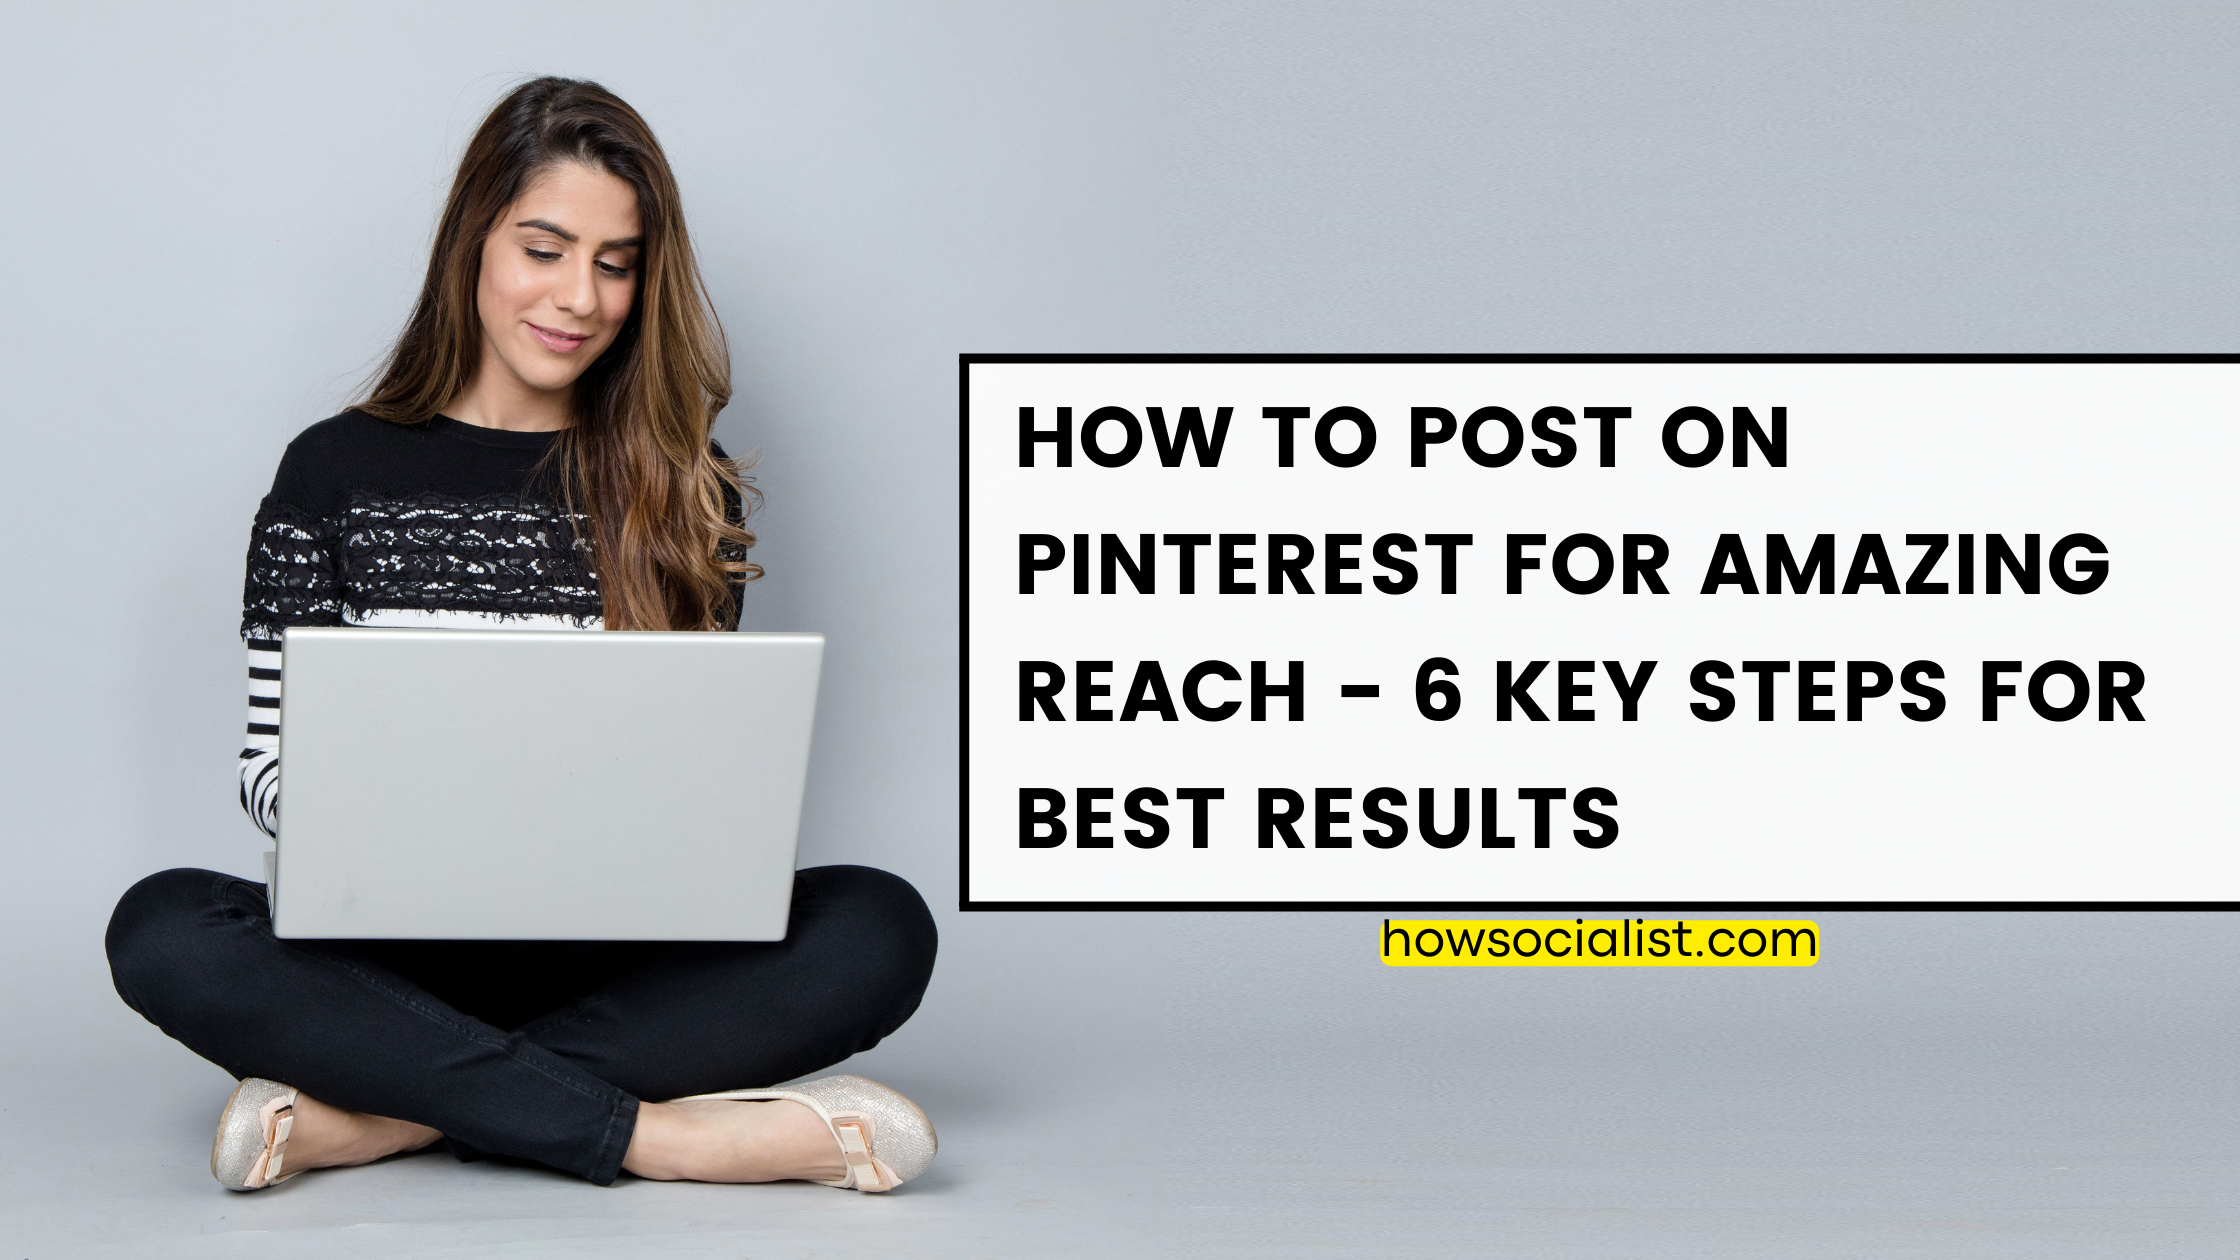 How To Post On Pinterest For Amazing Reach - 6 Key Steps For Best Results